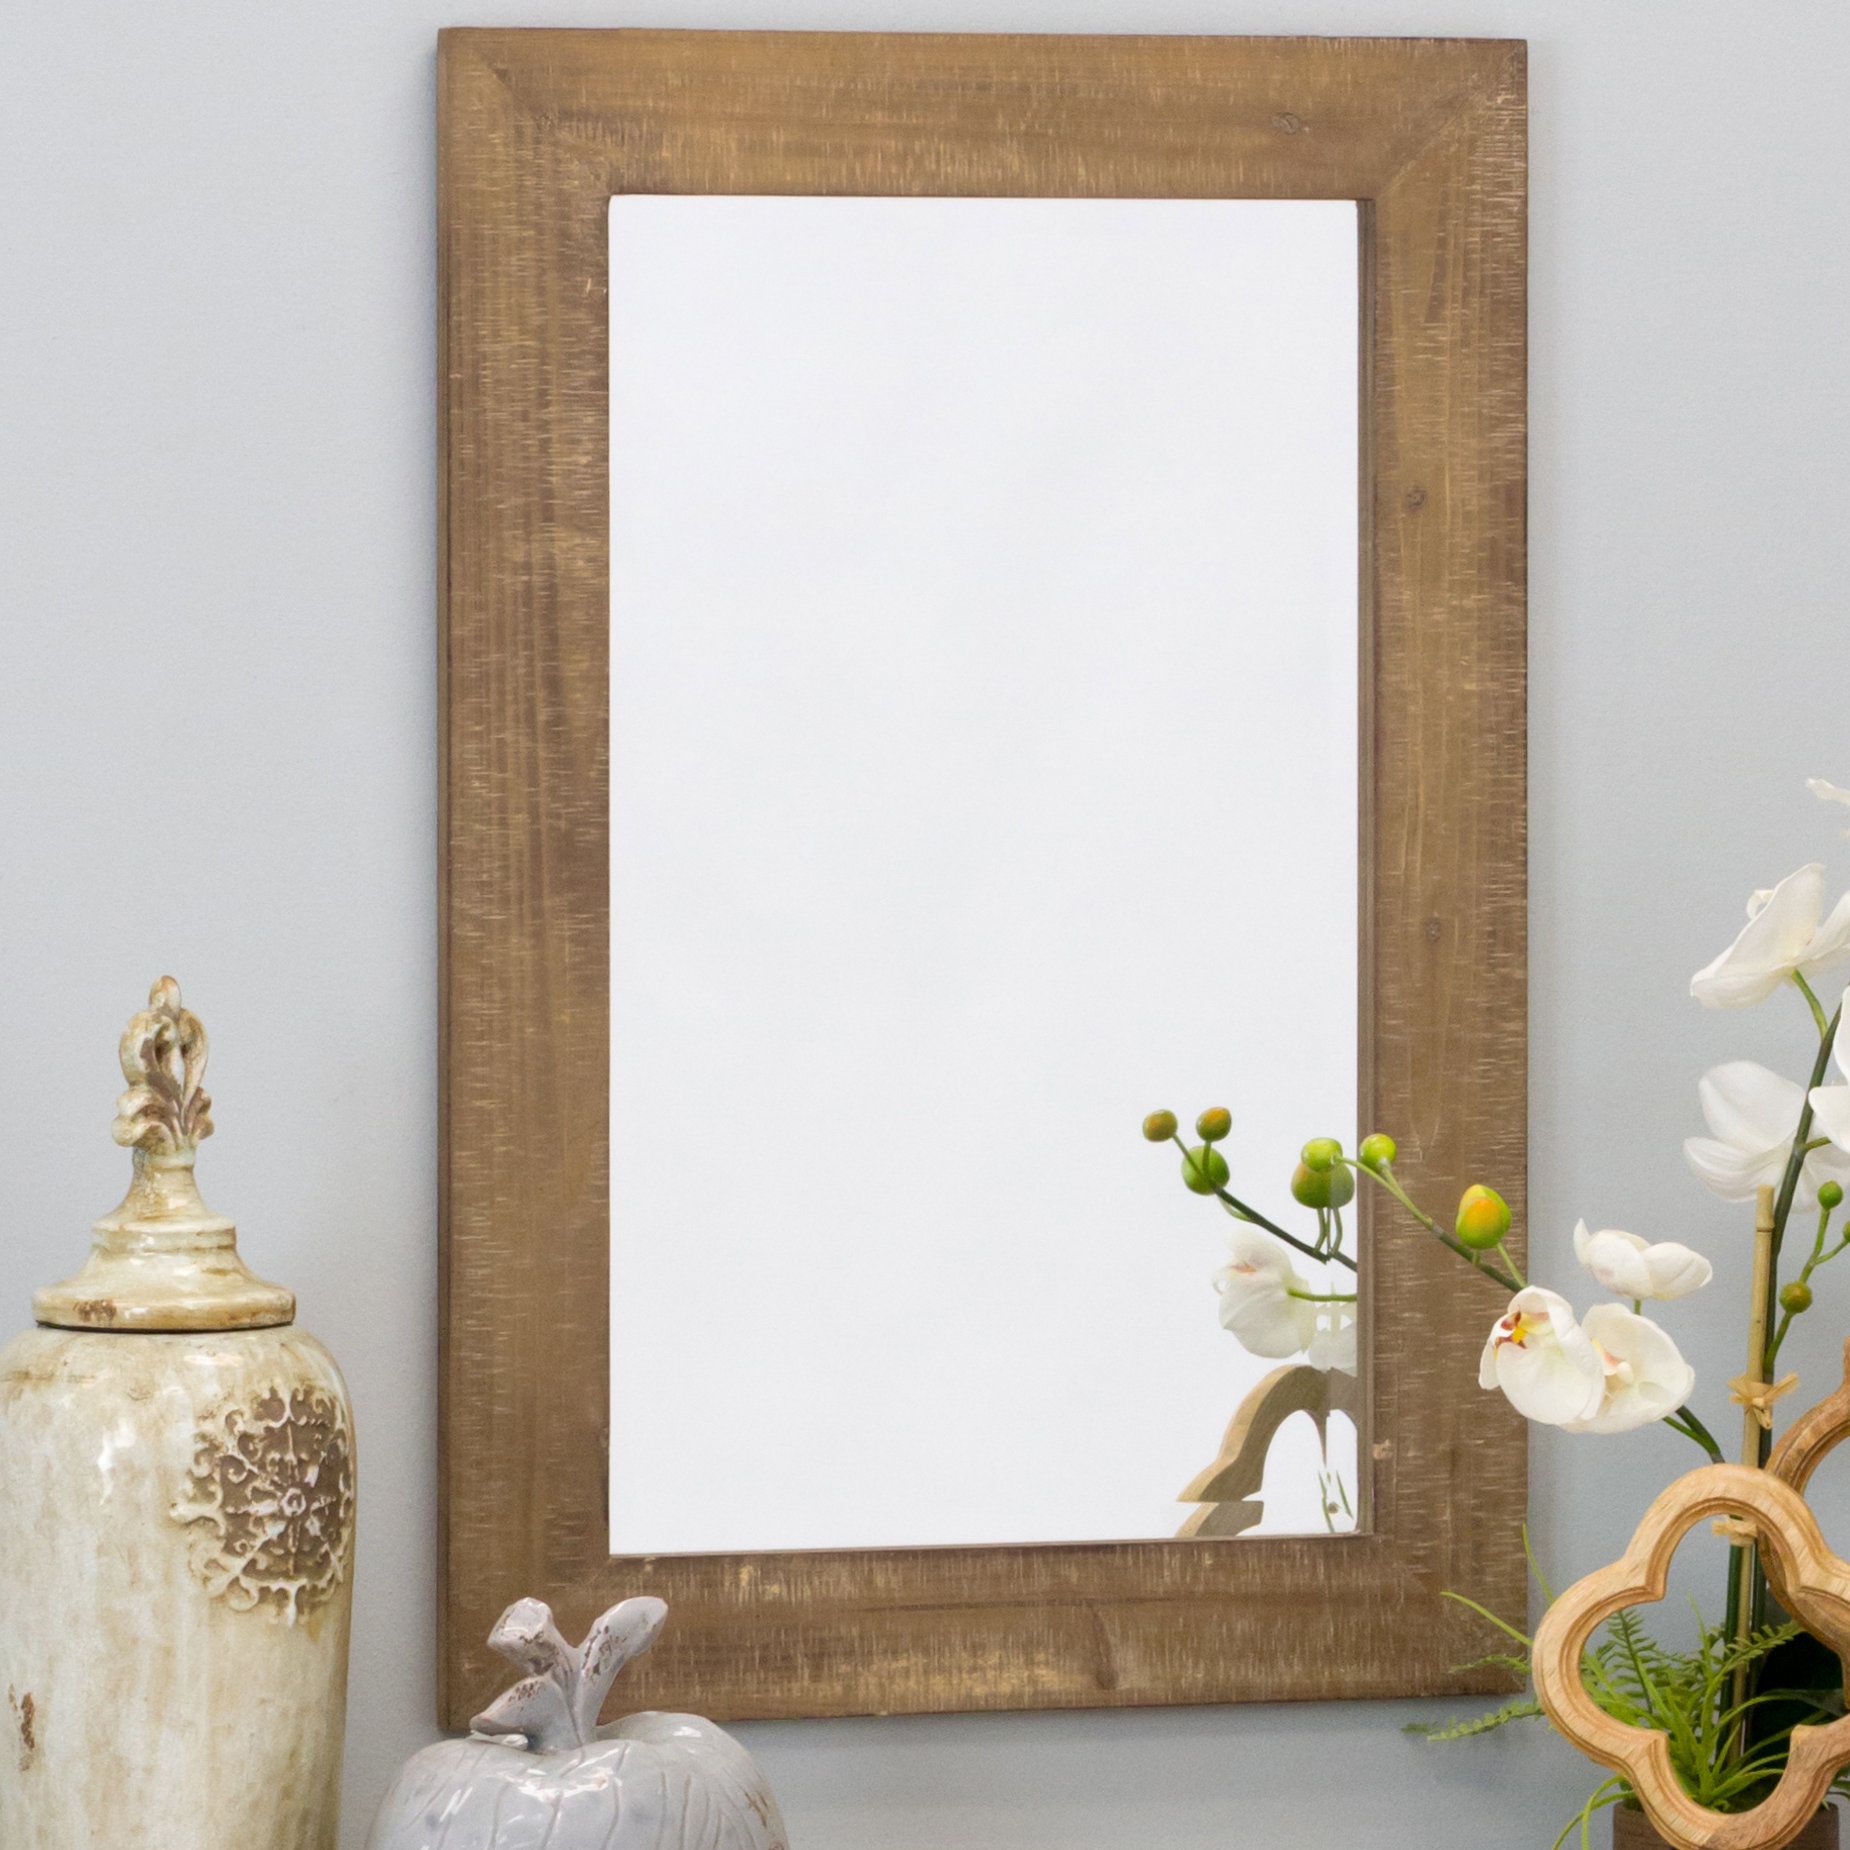 Longwood Wall Mirror With Regard To Kist Farmhouse Wall Mirrors (View 13 of 20)